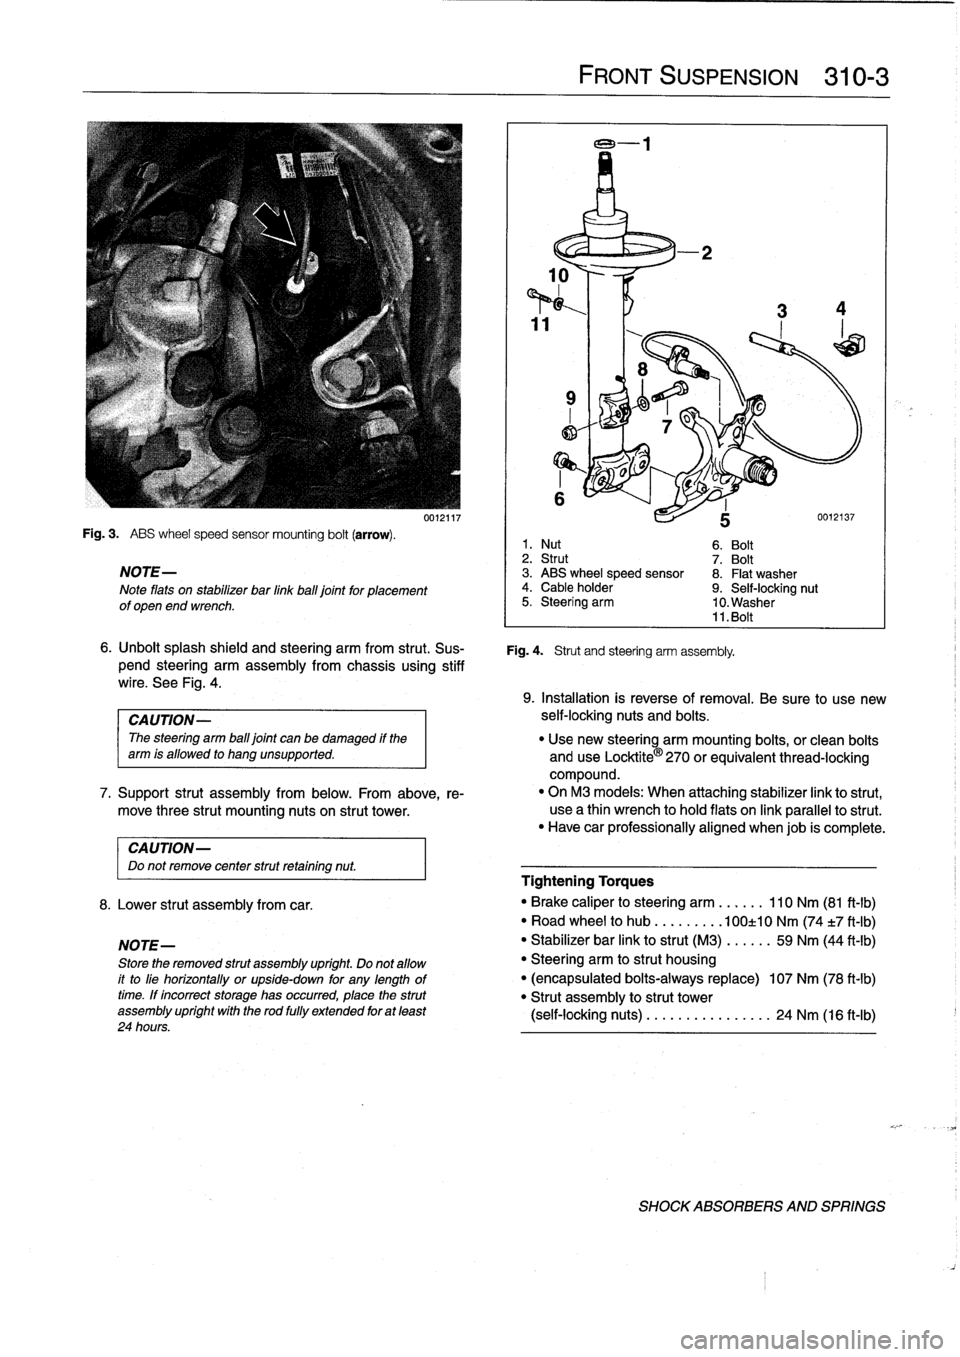 BMW 318i 1998 E36 Workshop Manual 
Fig
.
3
.

	

ABS
wheel
speed
sensor
mounting
bolt
(arrow)
.

NOTE-

Note
flats
on
stabilizer
bar
linkball
joint
for
placement
of
open
end
wrench
.

CAUTION-
Do
not
remove
center
strut
retaining
nut
